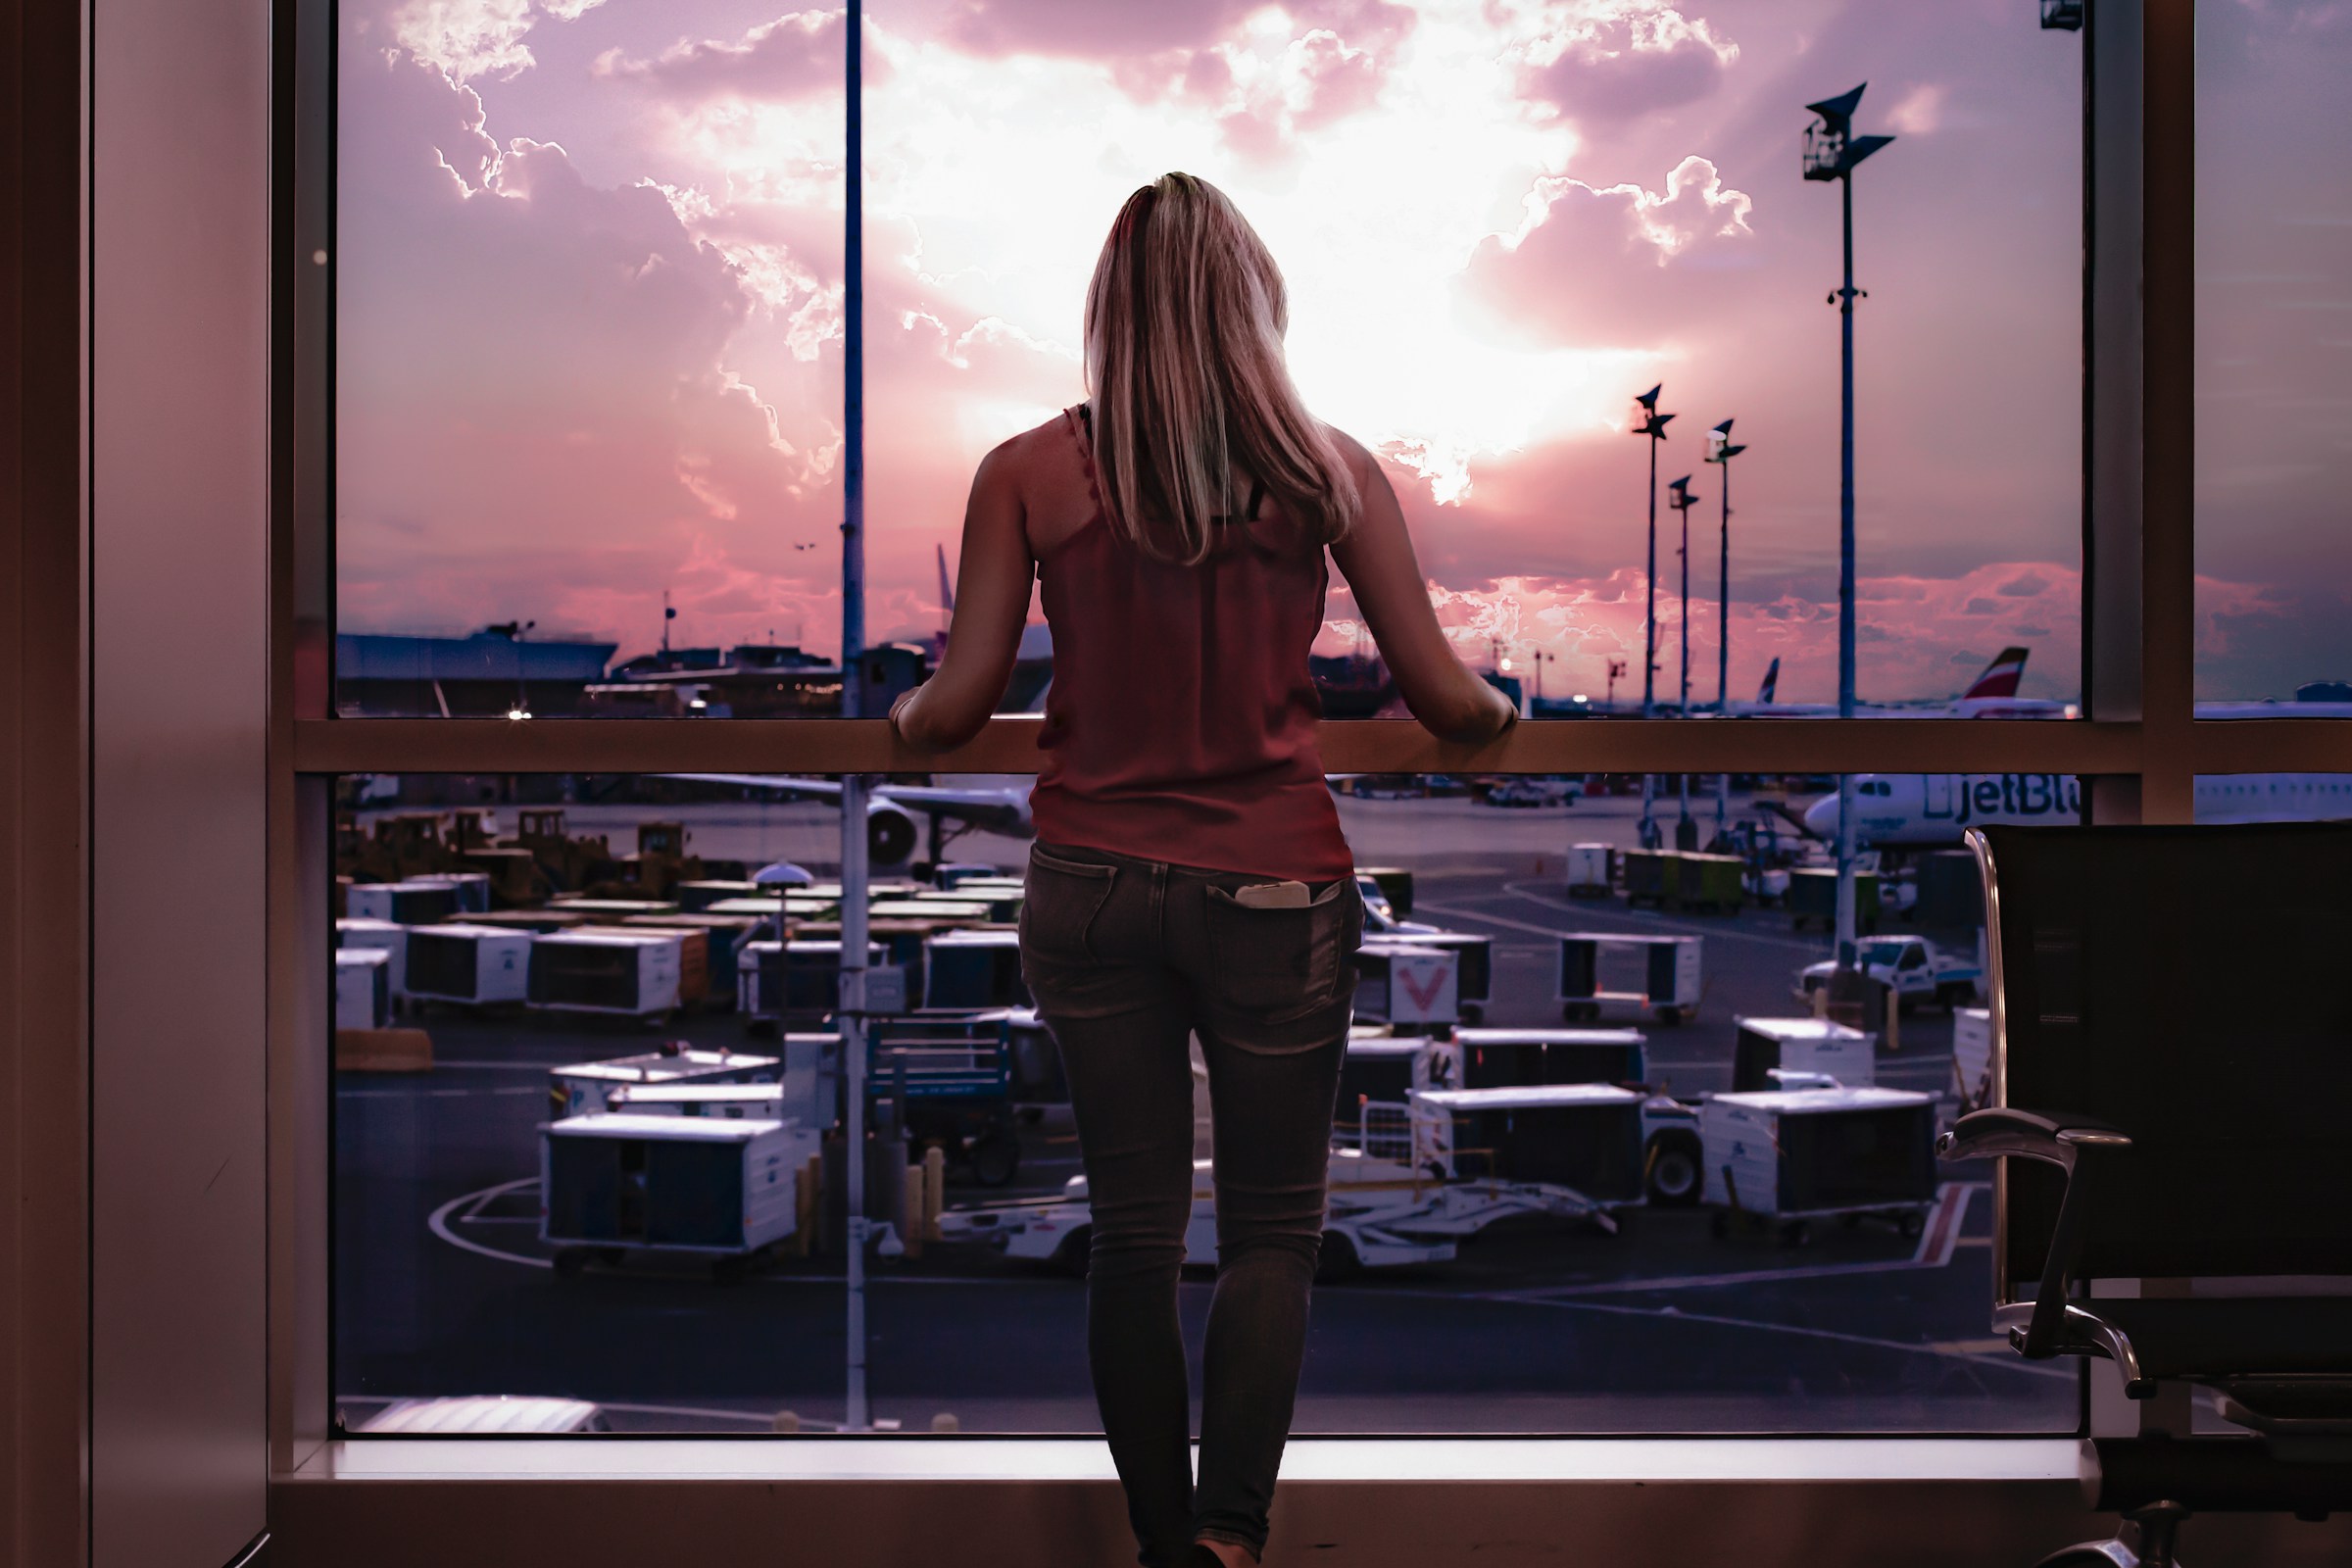 A woman at an airport | Source: Unsplash